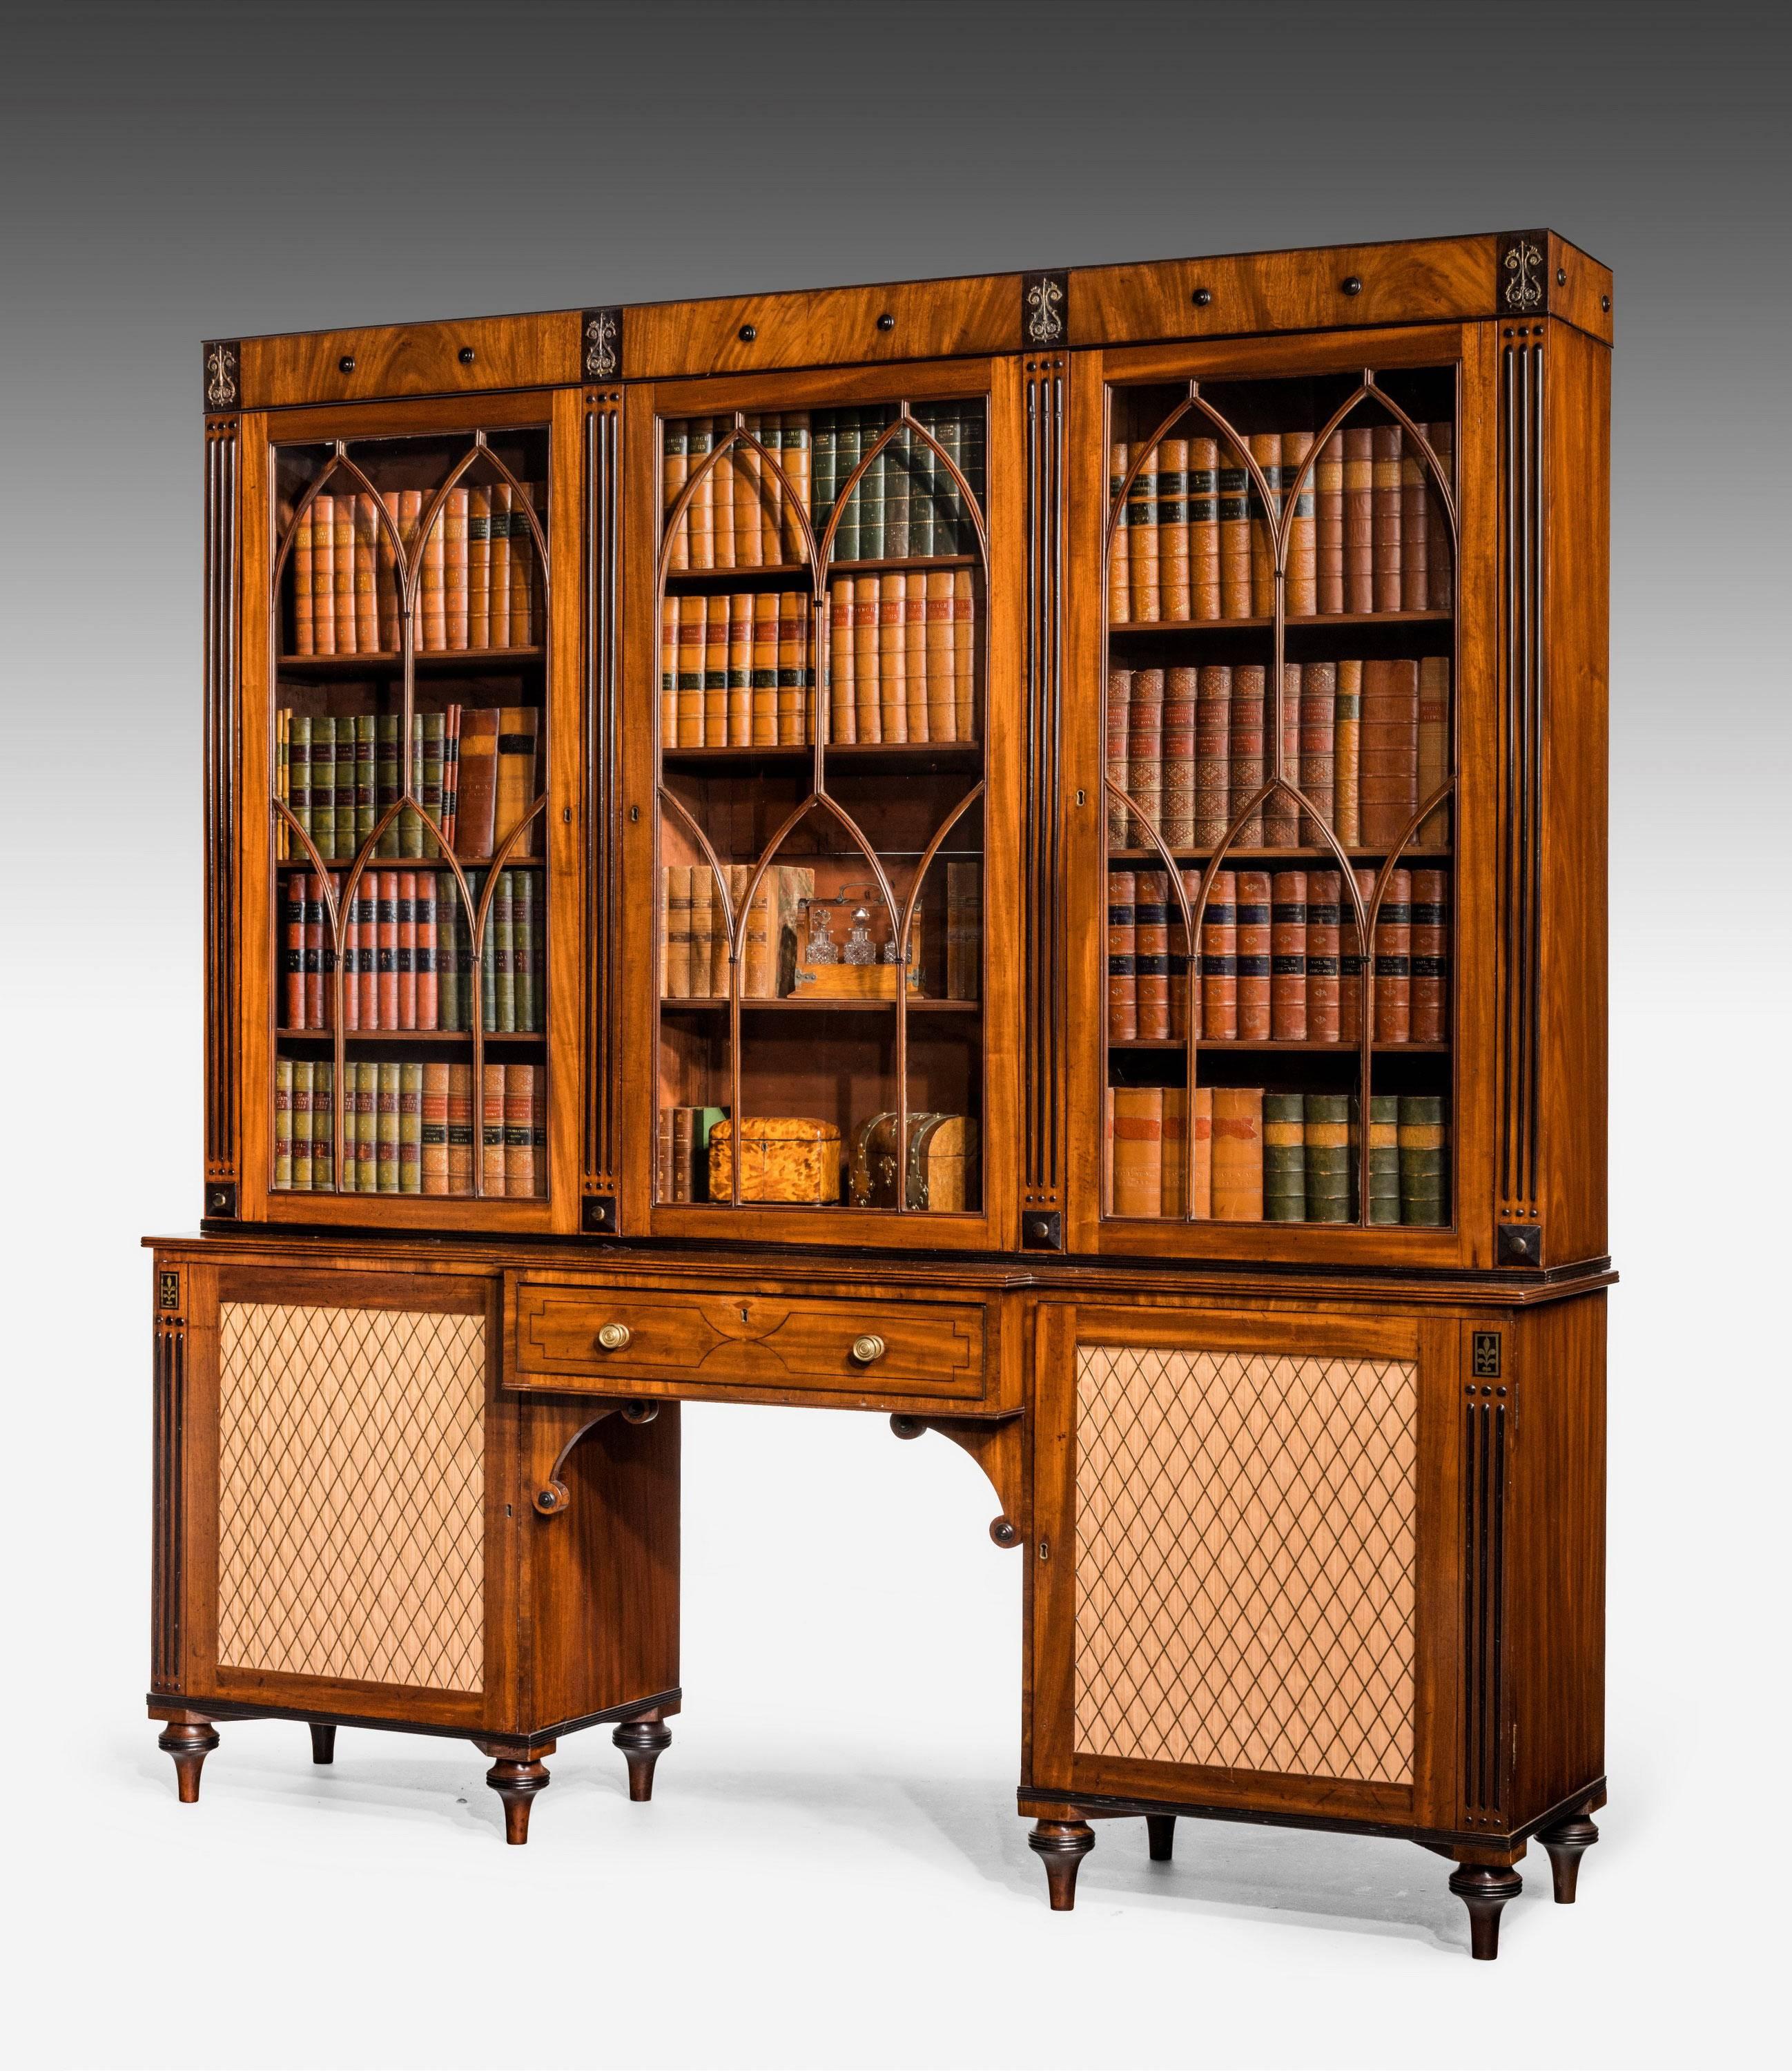 A Regency period mahogany secretaire library bookcase, circa 1820, in the manner of George Bullock, with ebonized and brass inlaid detail, the roundel and stylized lyre mounted frieze above three astragal glazed doors enclosing adjustable shelves,